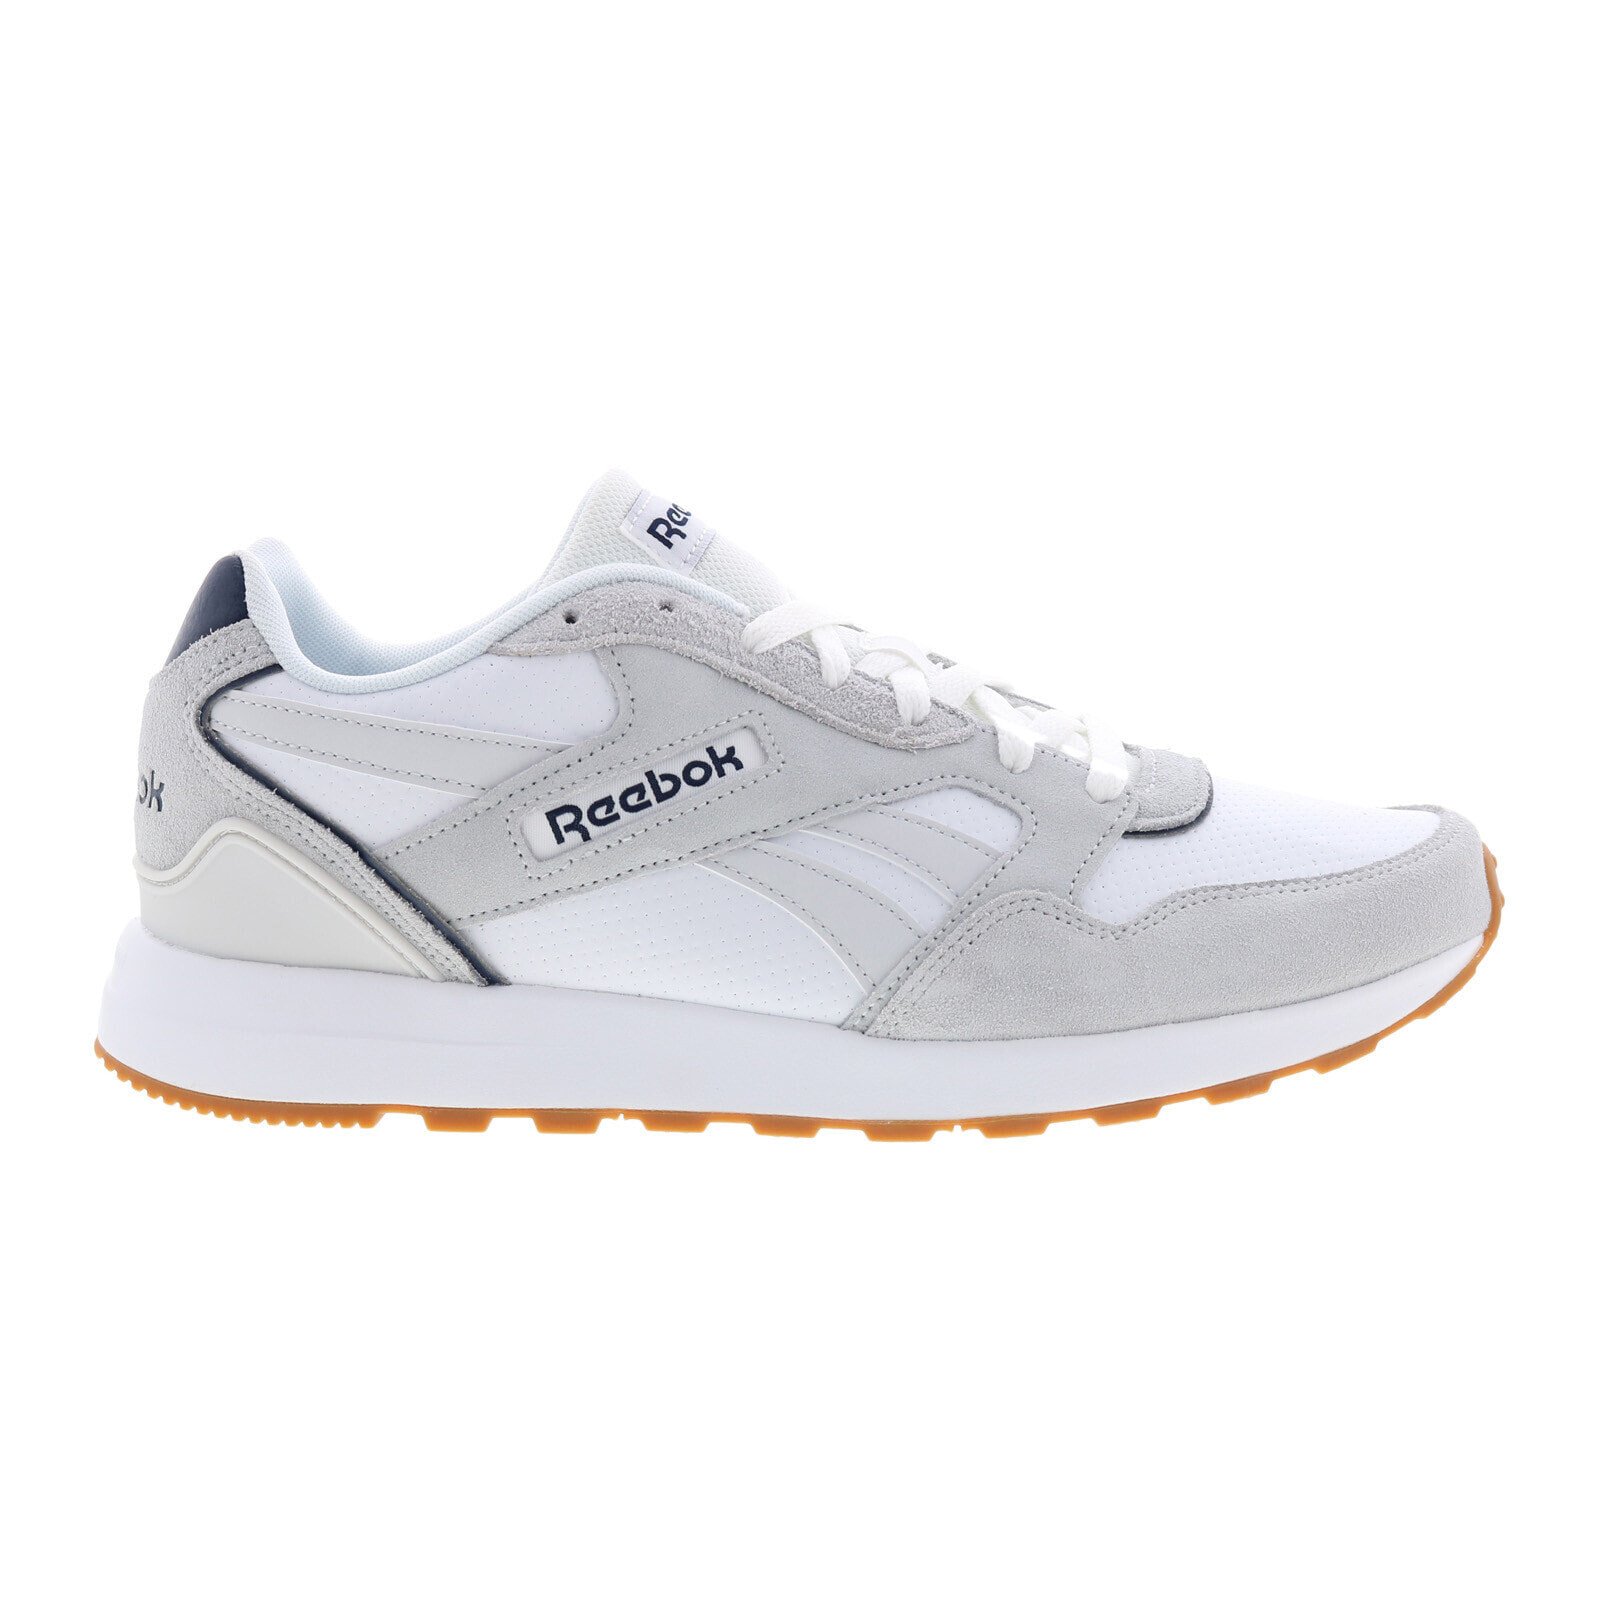 Reebok GL 1000 Leather GW4668 Mens White Suede Lifestyle Sneakers Shoes